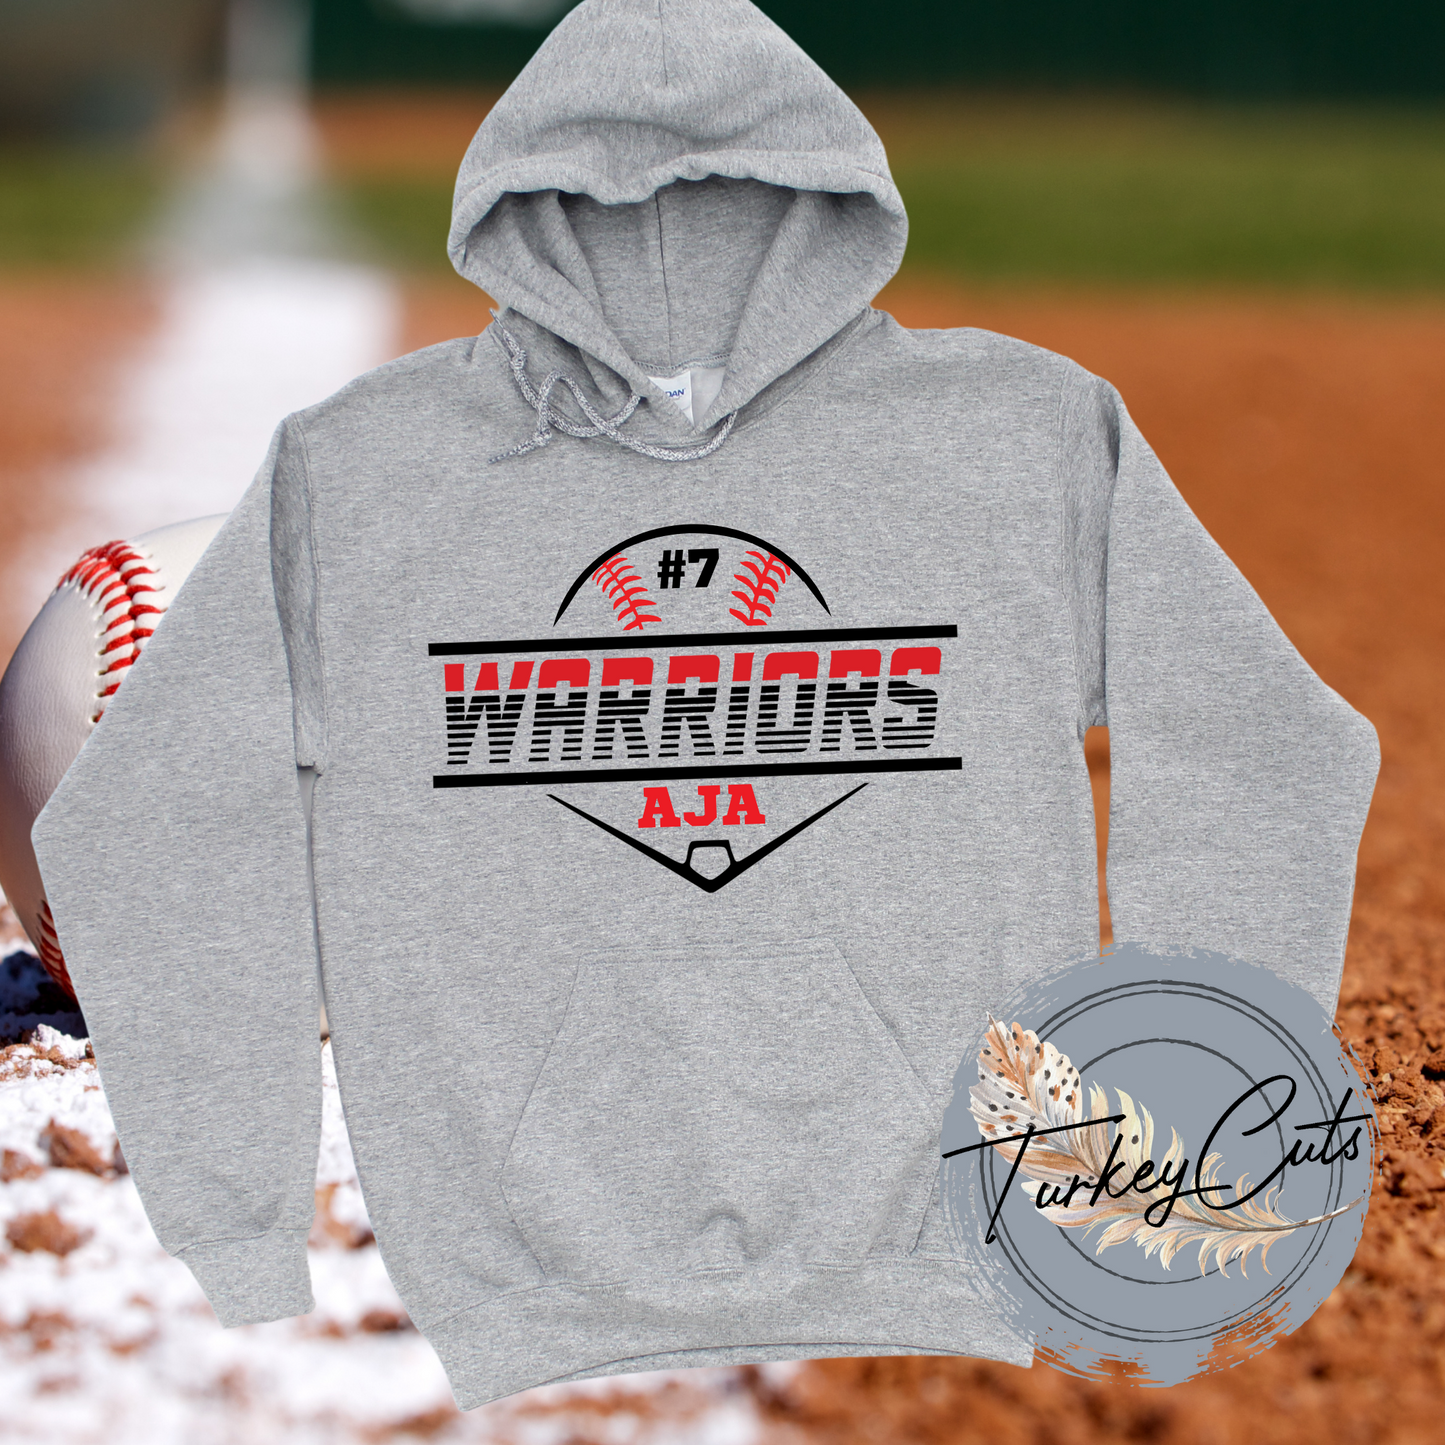 Warriors Baseball Hoodie (personalized with Jersey Number) - Adult